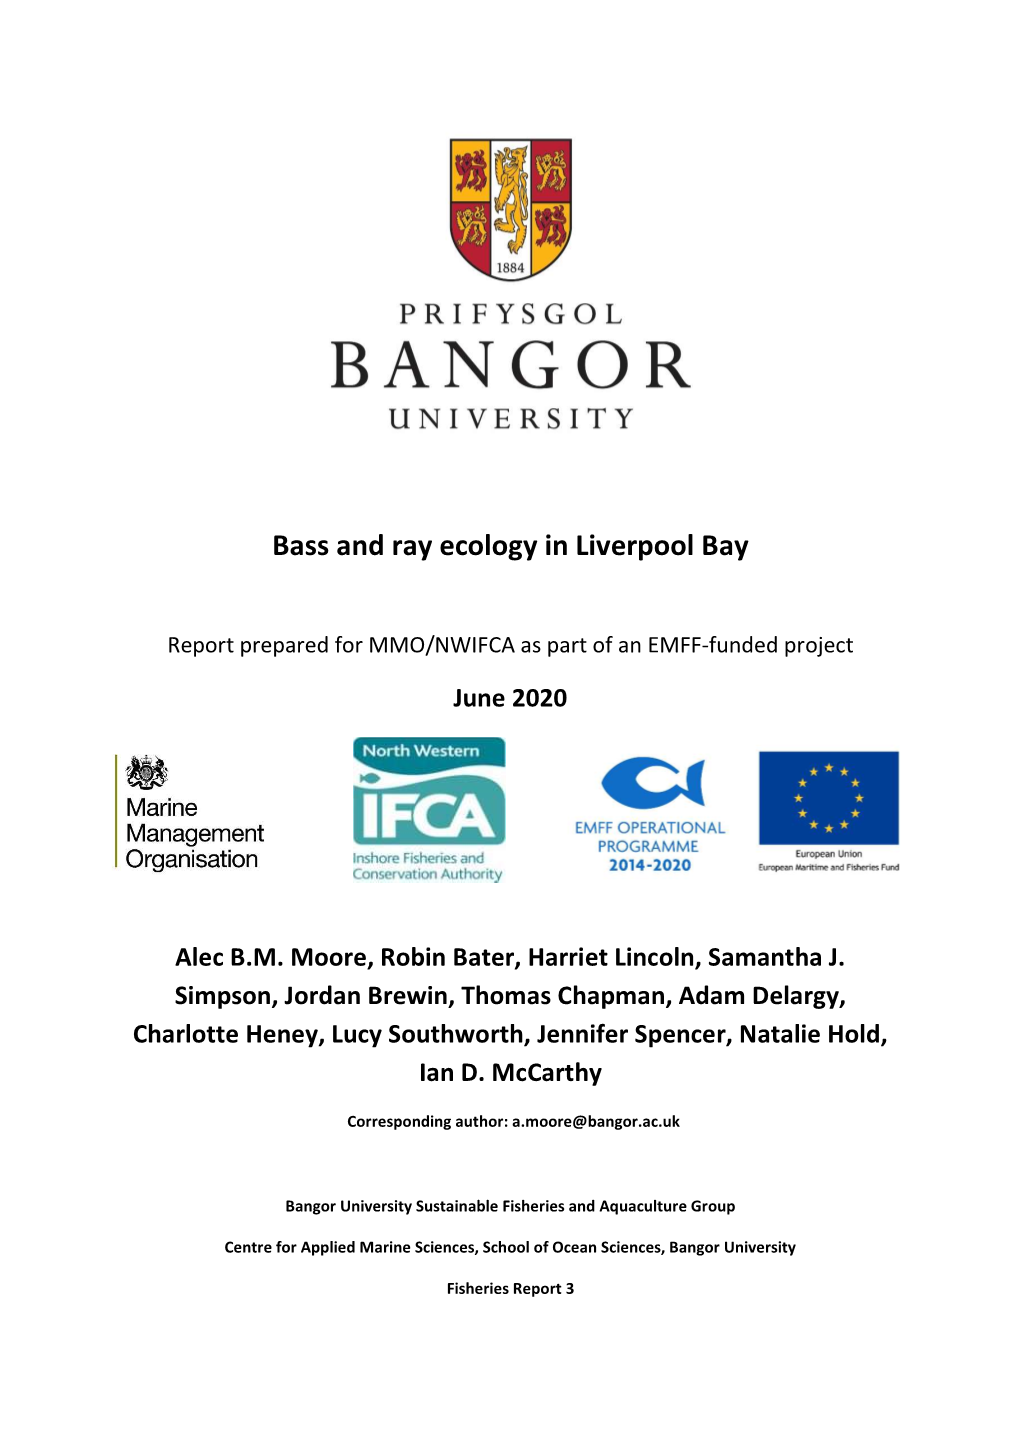 Bass and Ray Ecology in Liverpool Bay